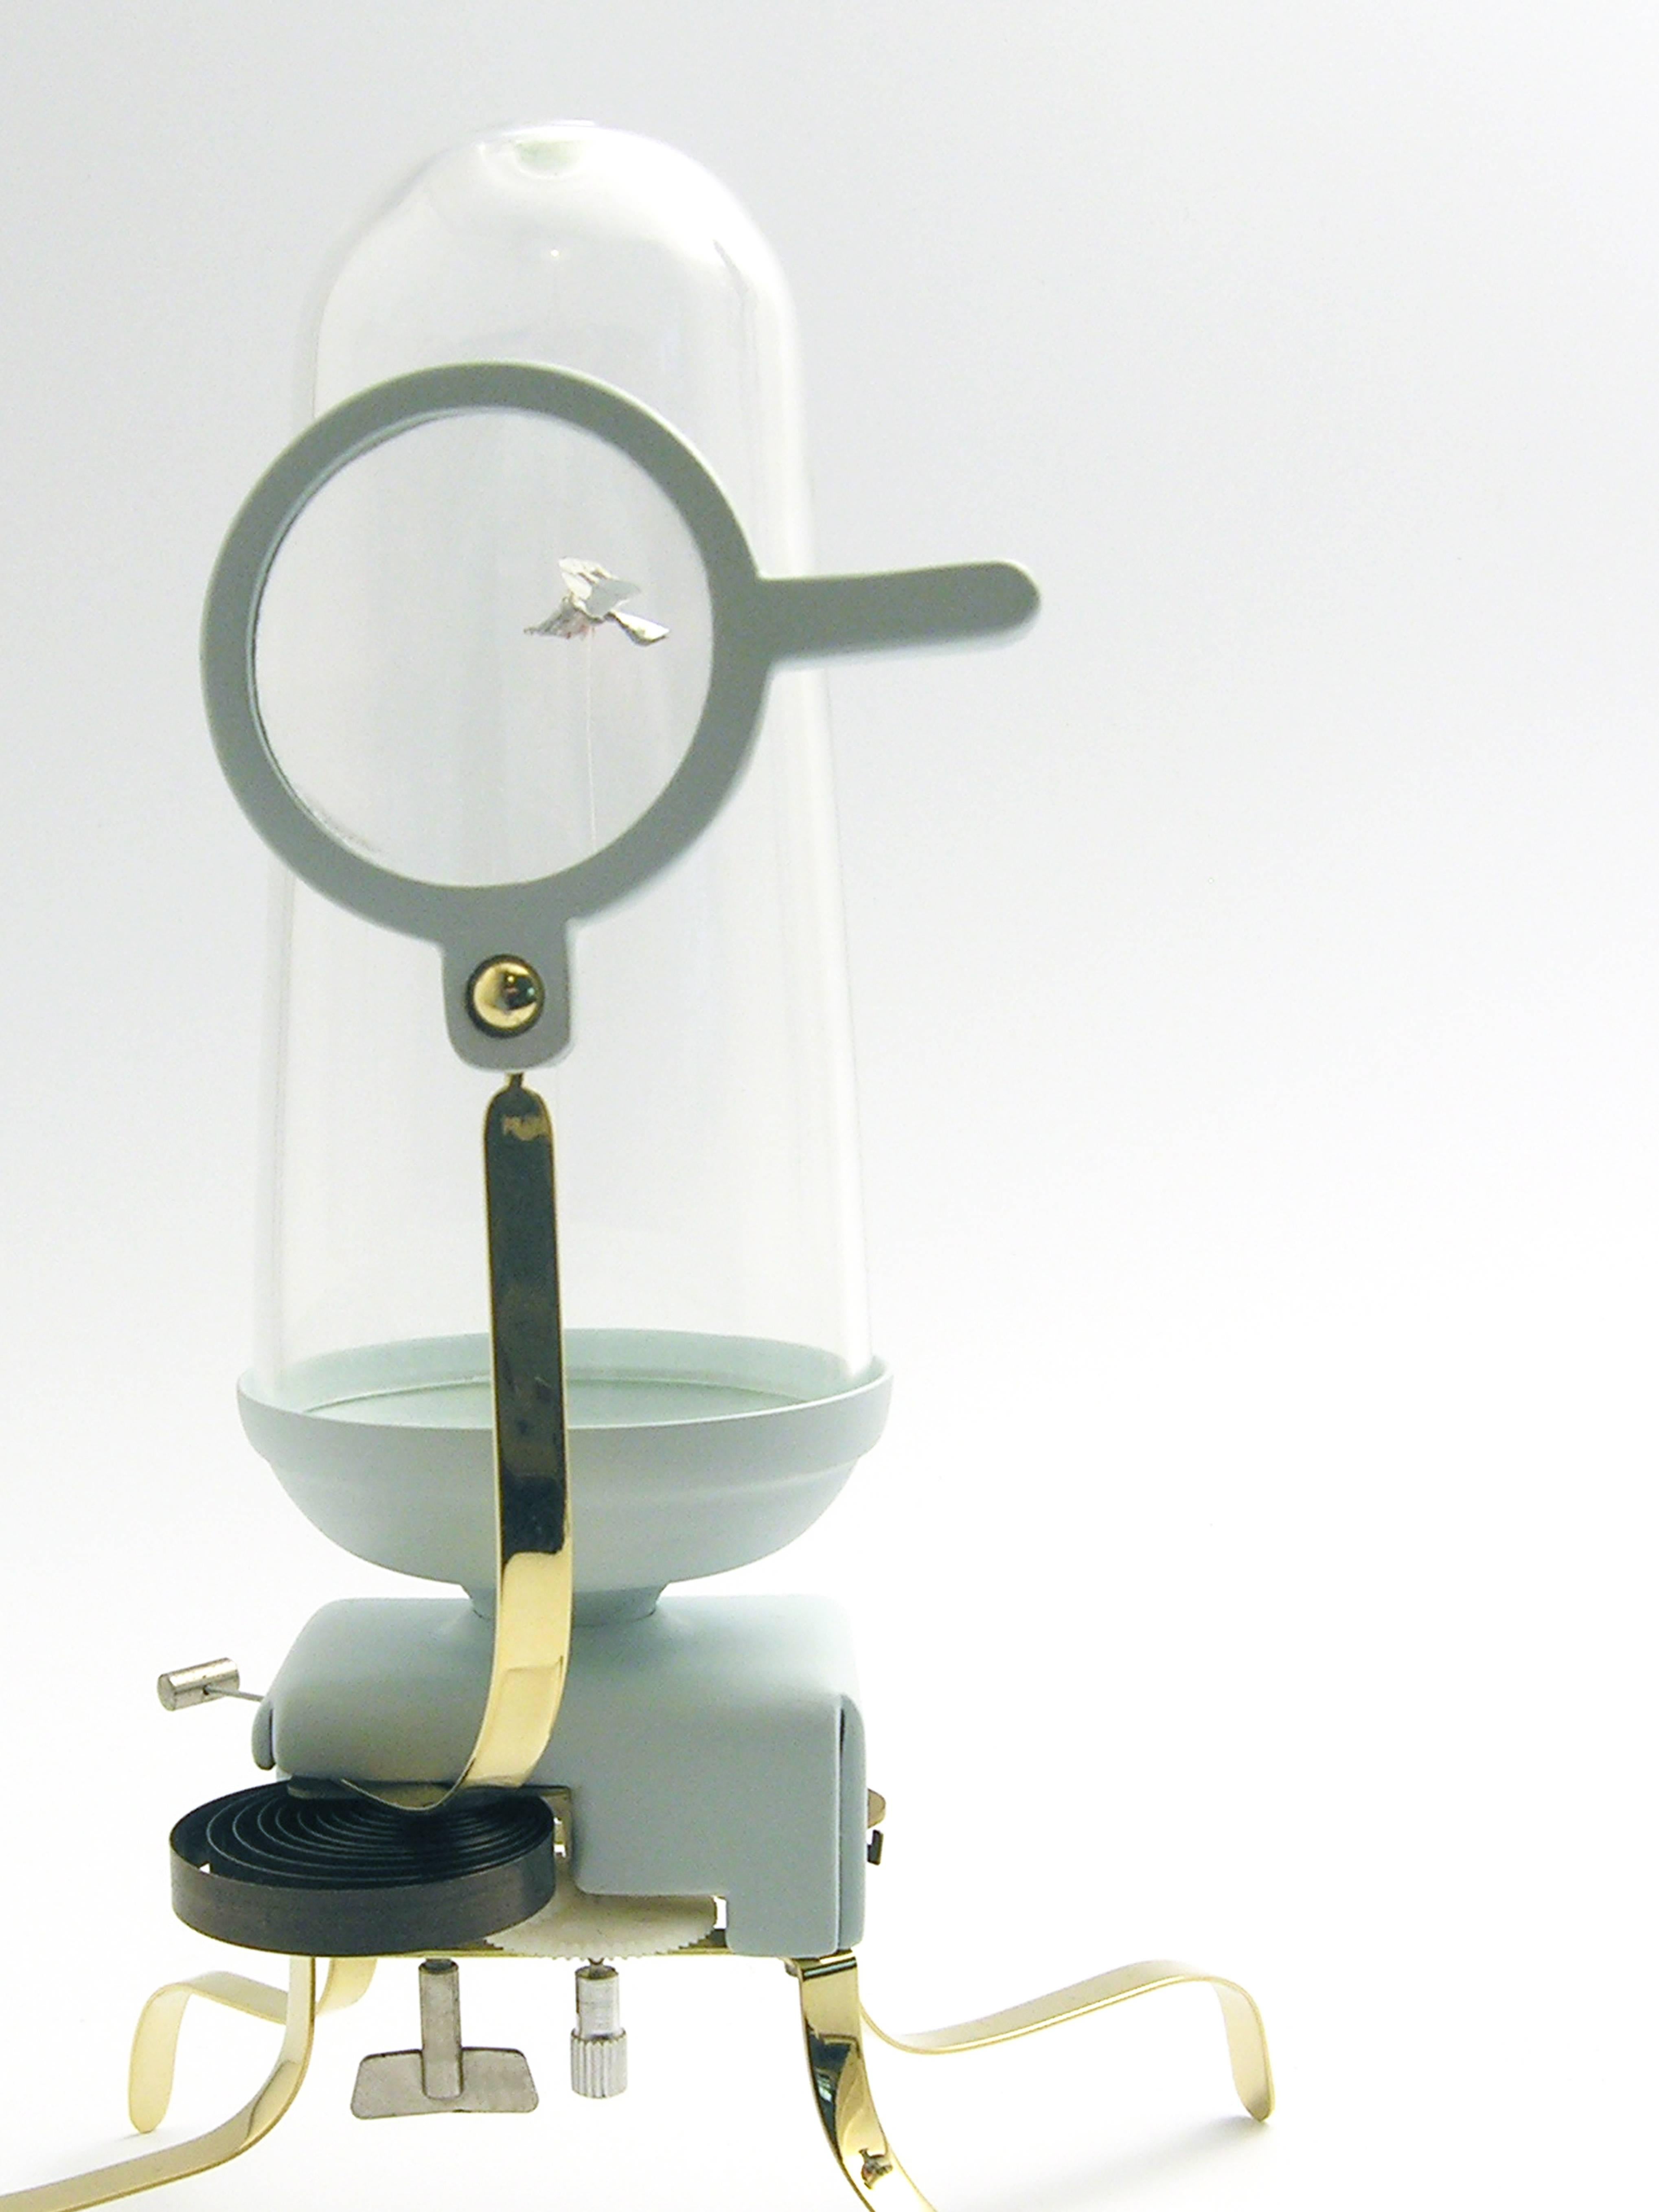 Watching time fly by illustrates a new way of experiencing time. This table-clock doesn't show you what time it is but allows one to see the passing of time. In the glass shell there is a fly, made out of a 500 euro bill, that flies exactly one